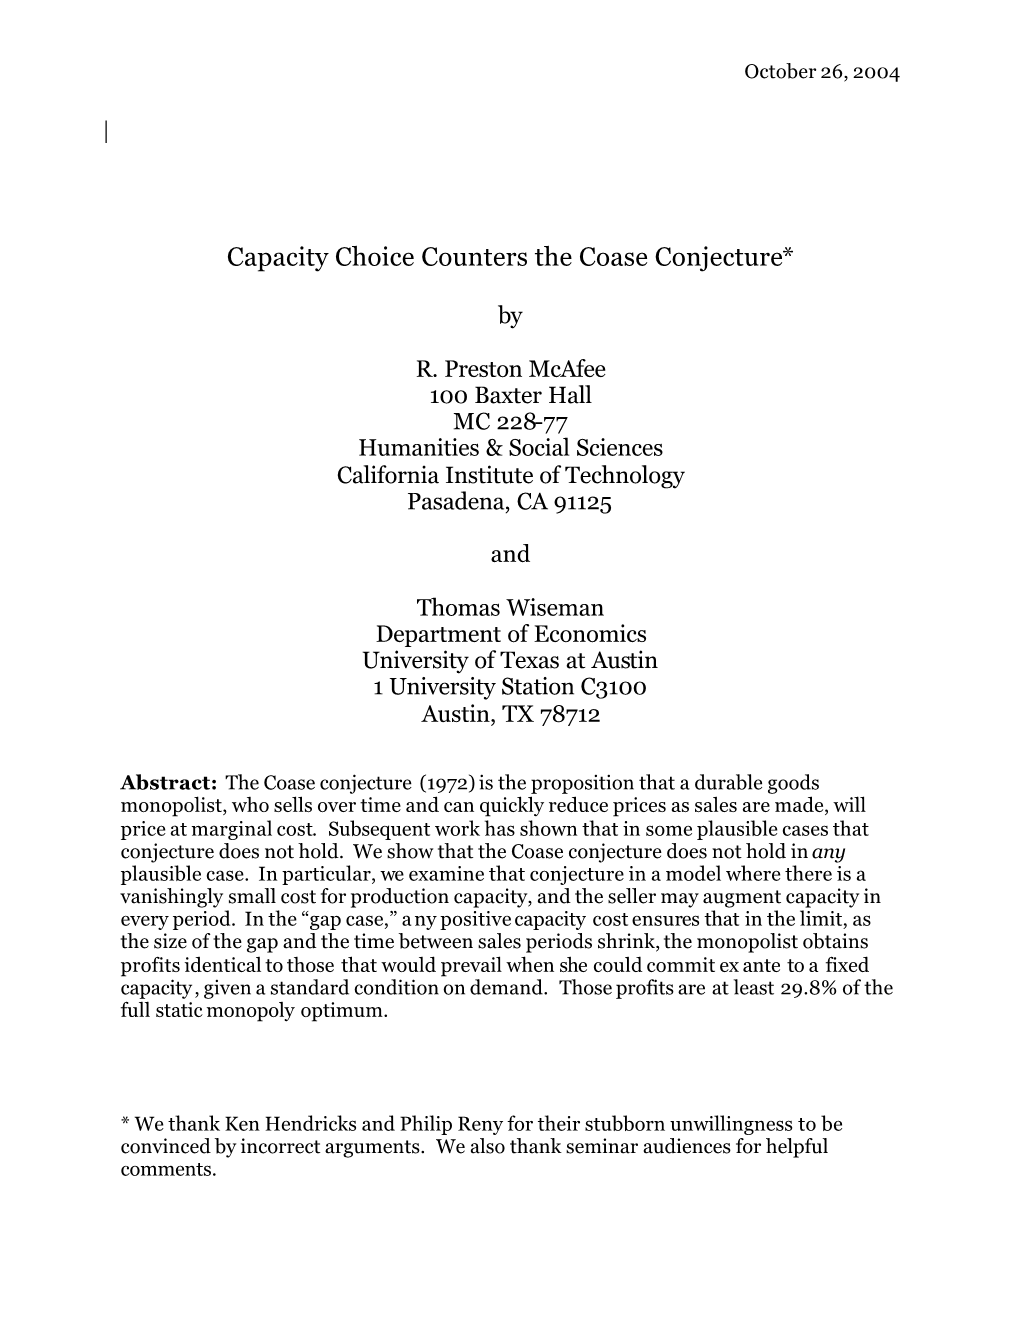 Capacity Choice Counters the Coase Conjecture*